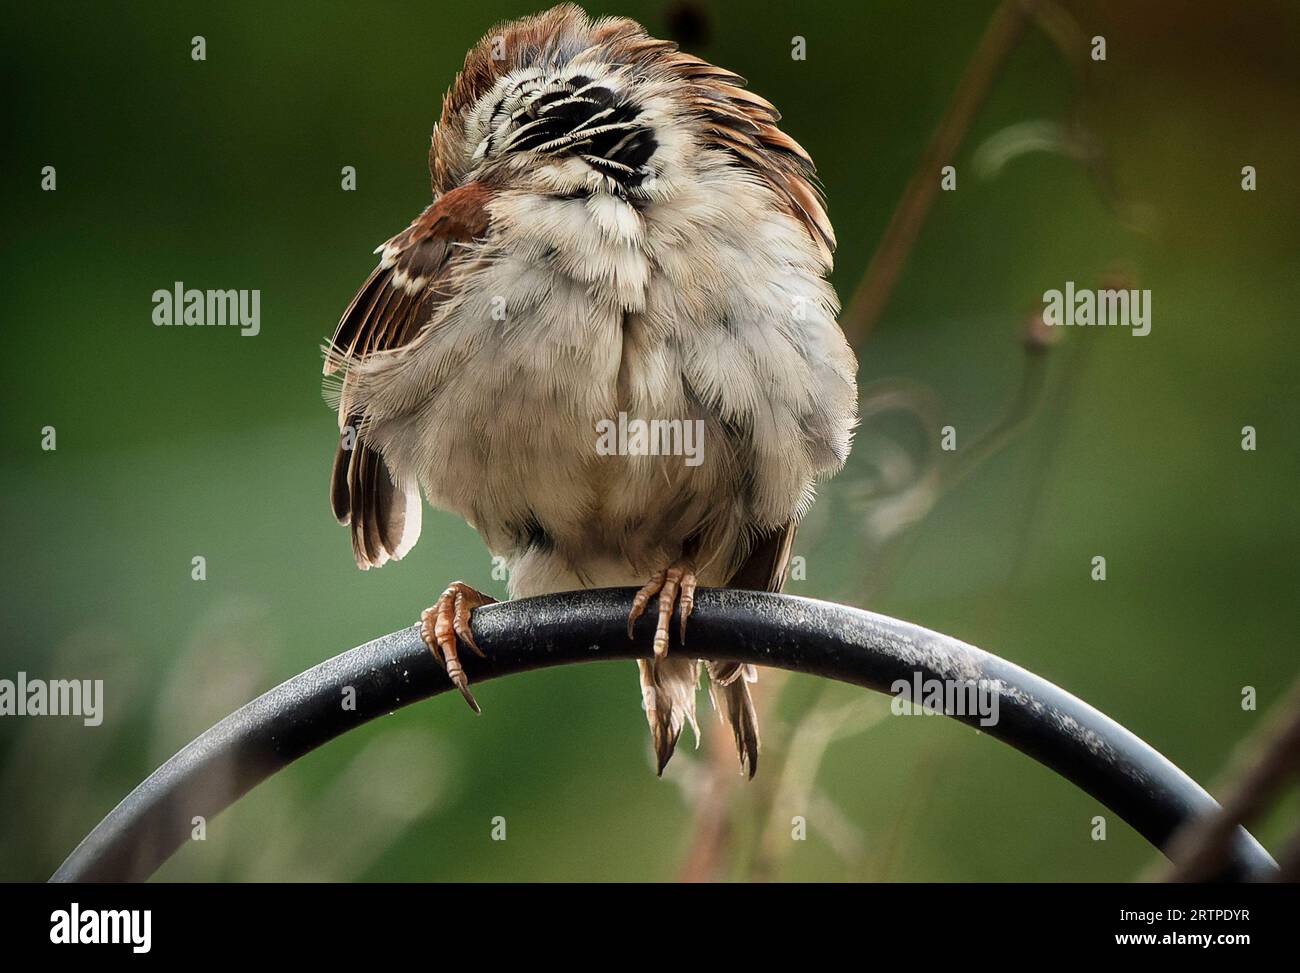 Puffed up gray sparrow on a high perch Stock Photo